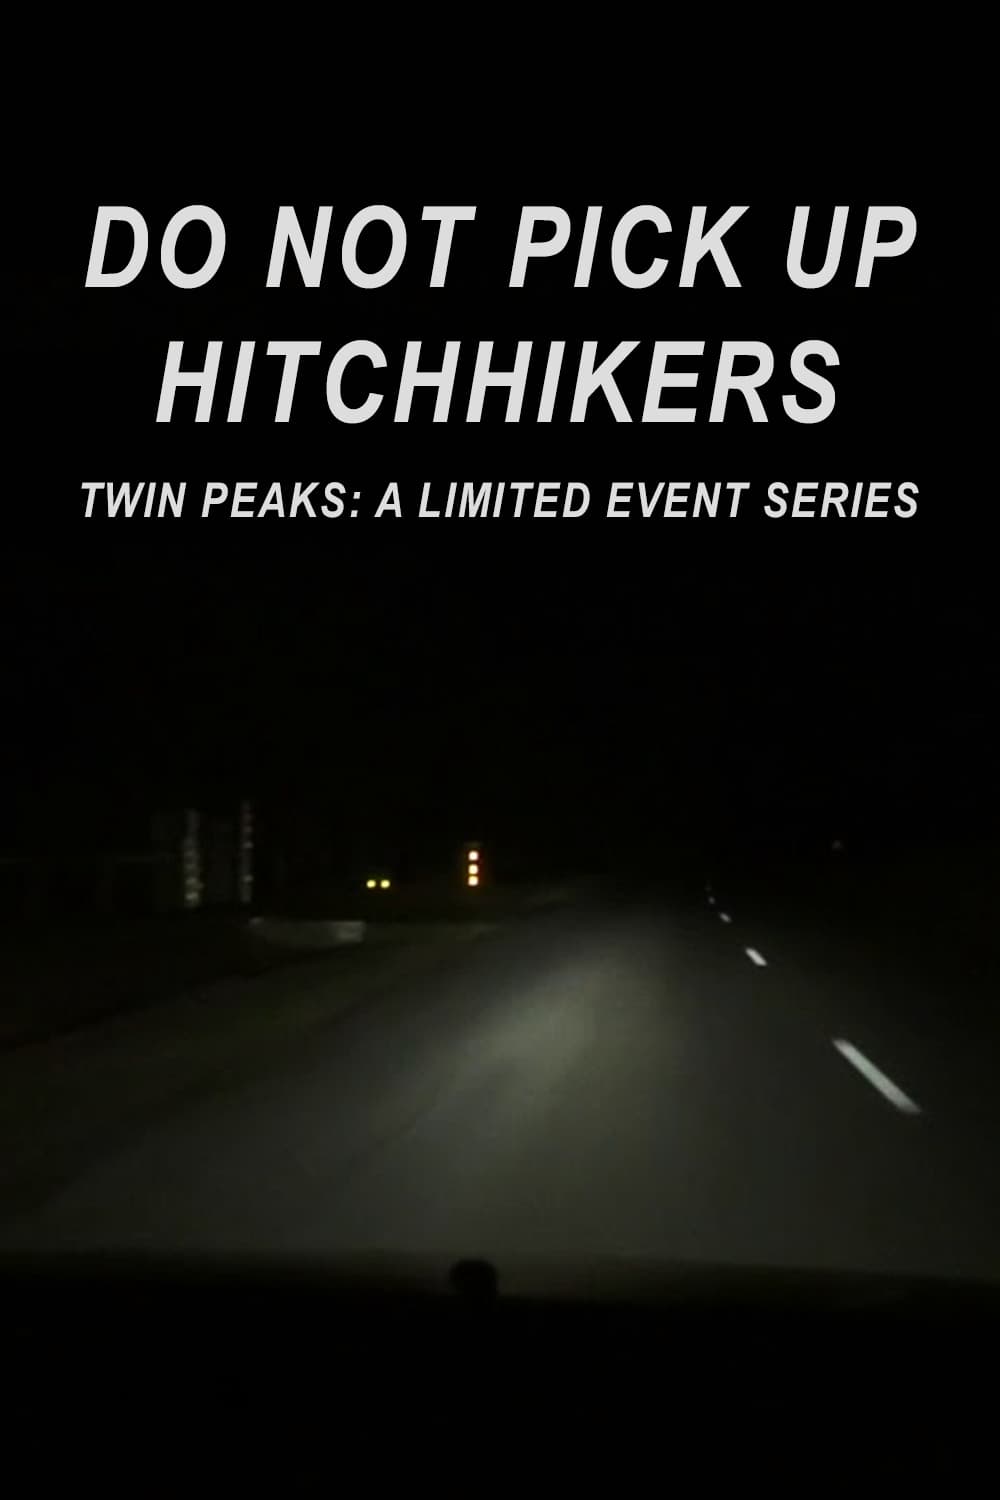 Do Not Pick Up Hitchhikers